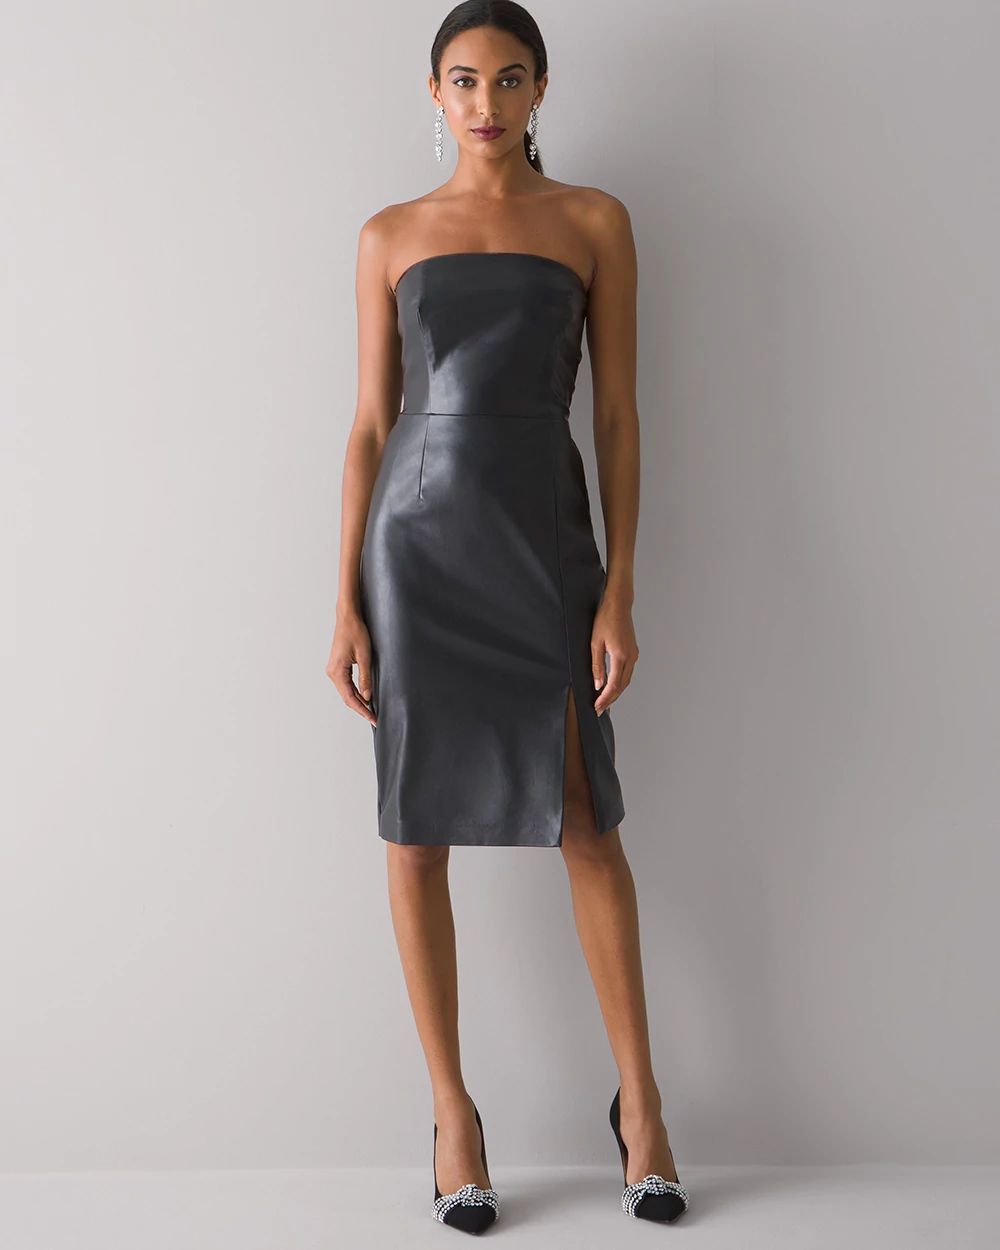 Faux-Leather Sheath Dress click to view larger image.